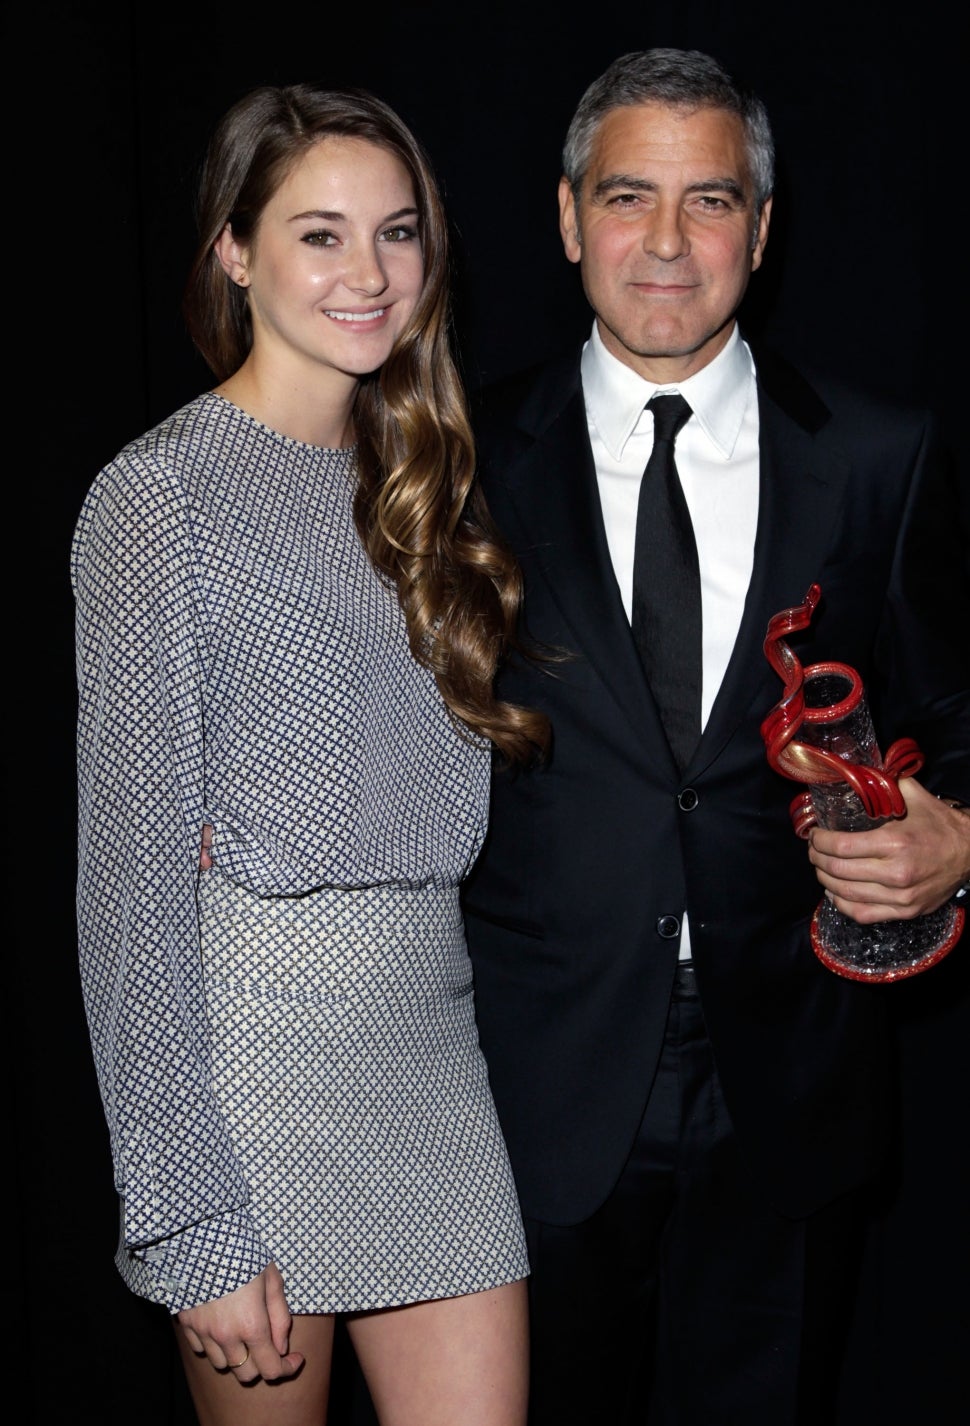 Shailene Woodley and George Clooney